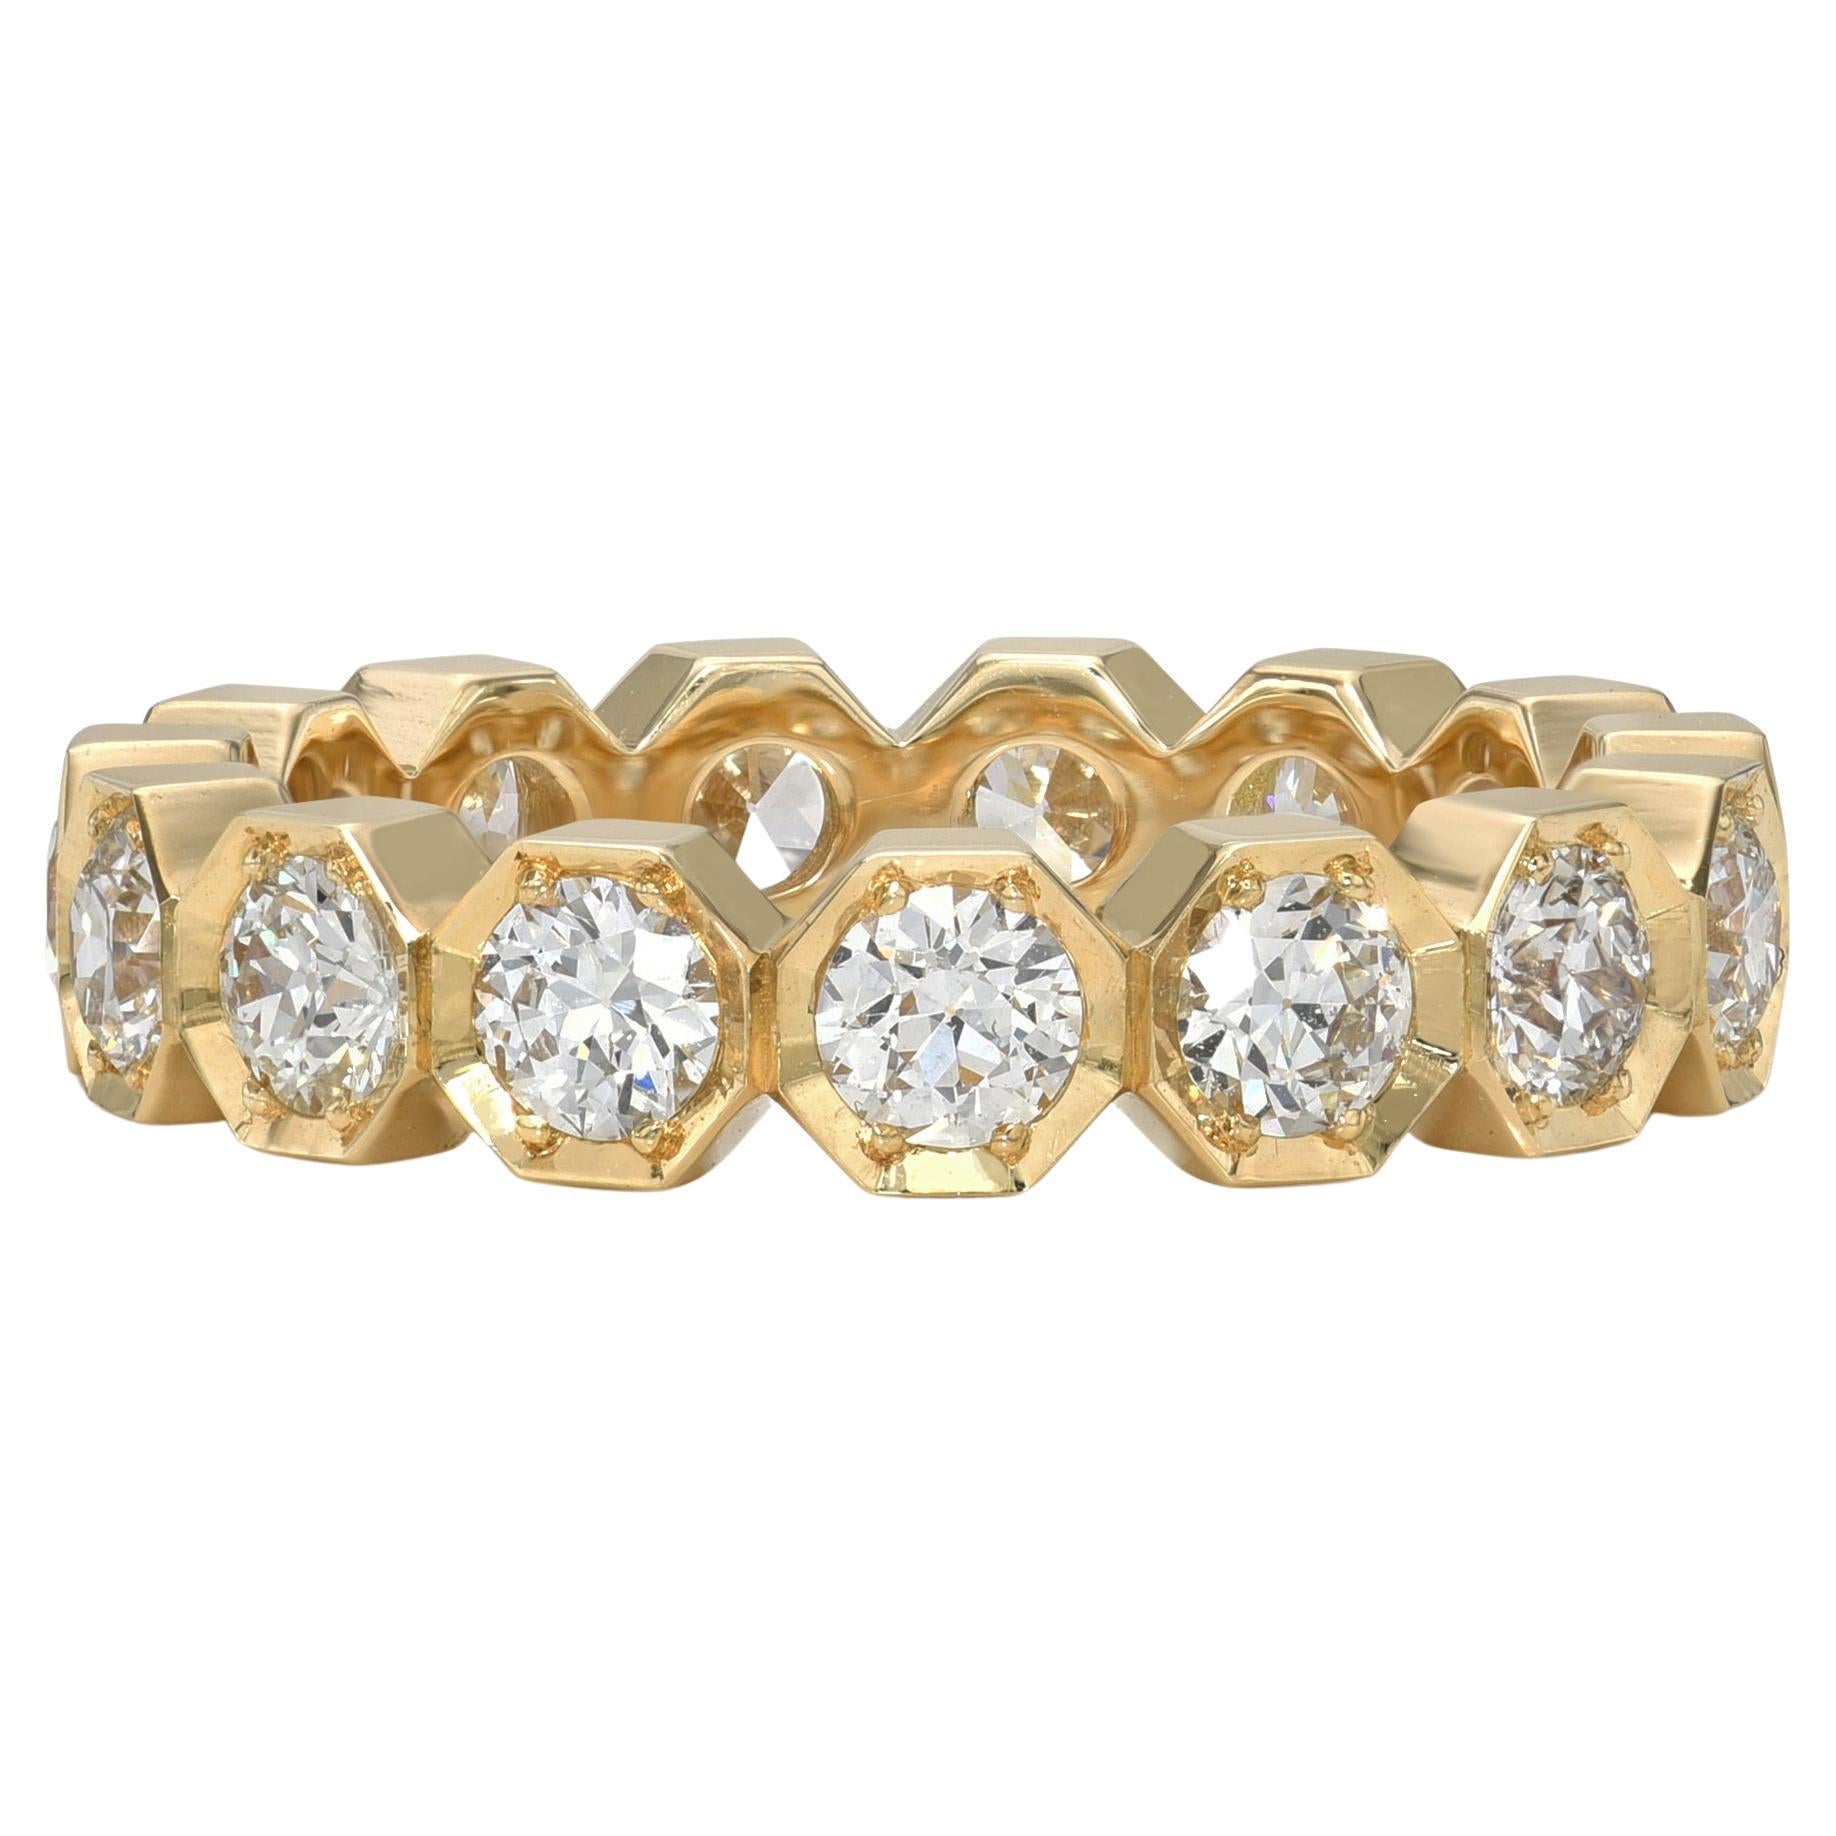 For Sale:  Handcrafted Gemma Old European Cut Diamond Eternity Band by Single Stone